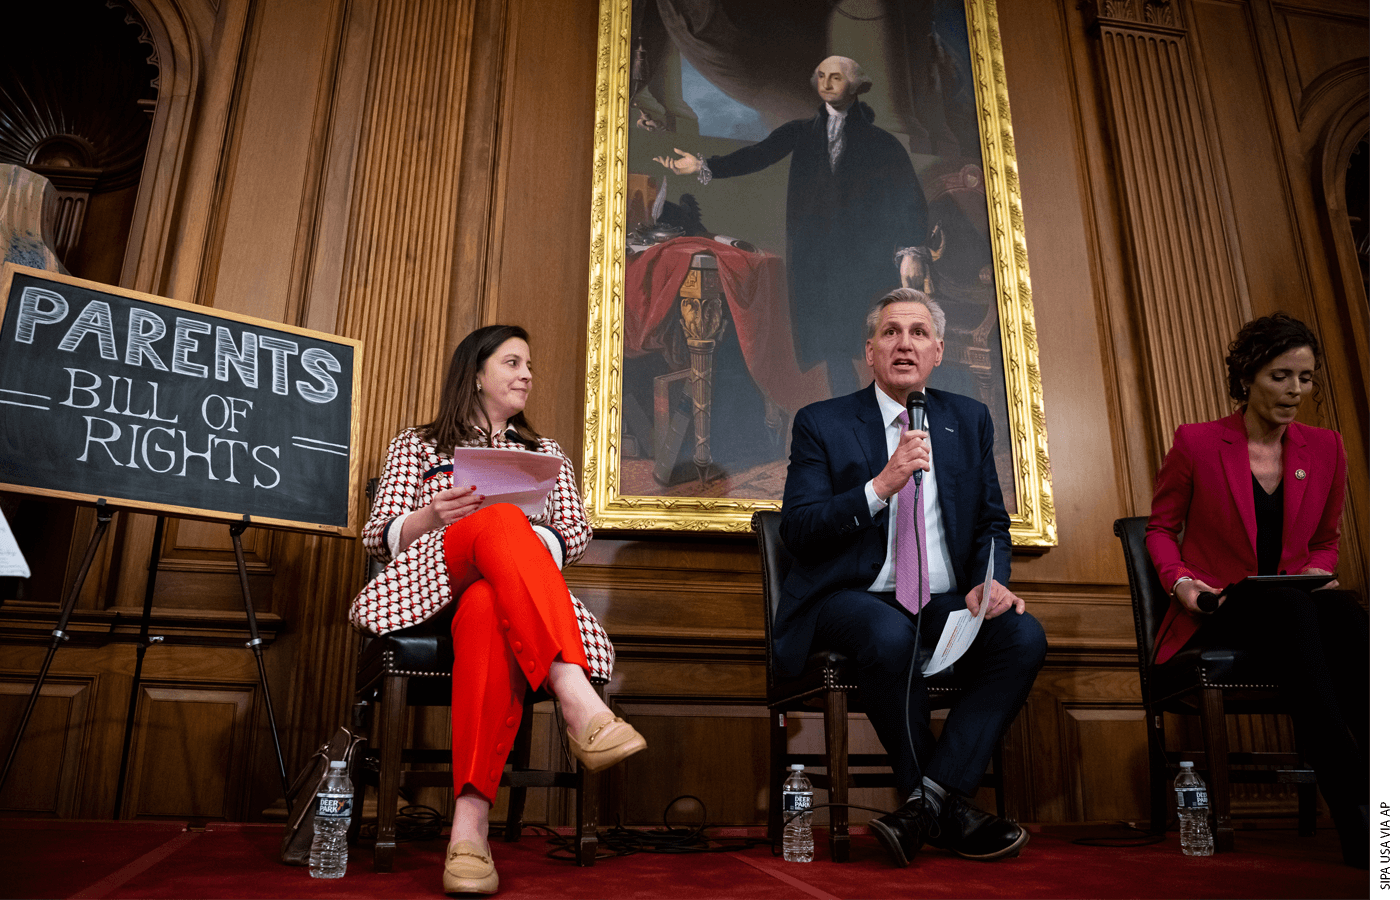 Speaker of the House Kevin McCarthy (R-CA) speaks to guests with Representative Elise Stefanik (R-N.Y.) during a press event highlighting the "Parents Bill of Rights", at the U.S. Capitol, in Washington, D.C., on Wednesday, March 1, 2023.